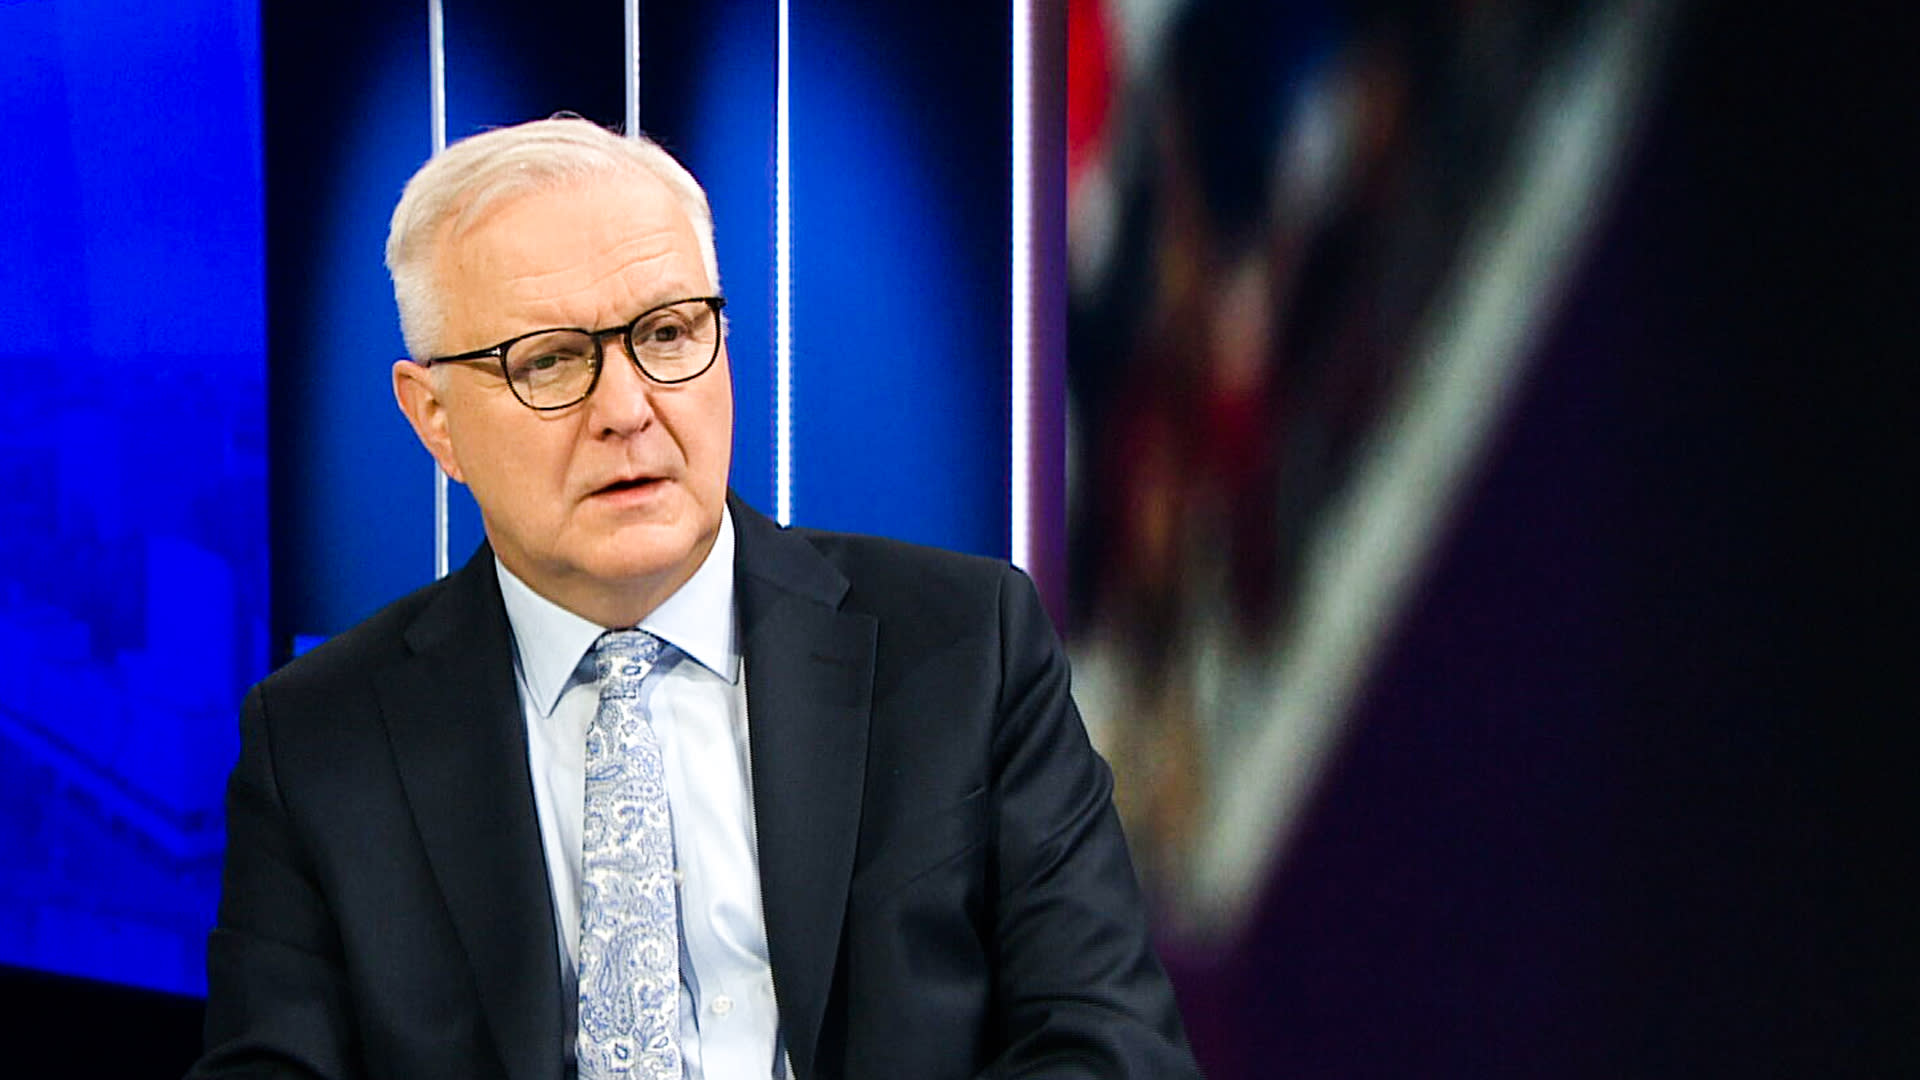 Central Bank Governor Rehn: ECB continues to raise interest rates;  too early to discuss the presidential election